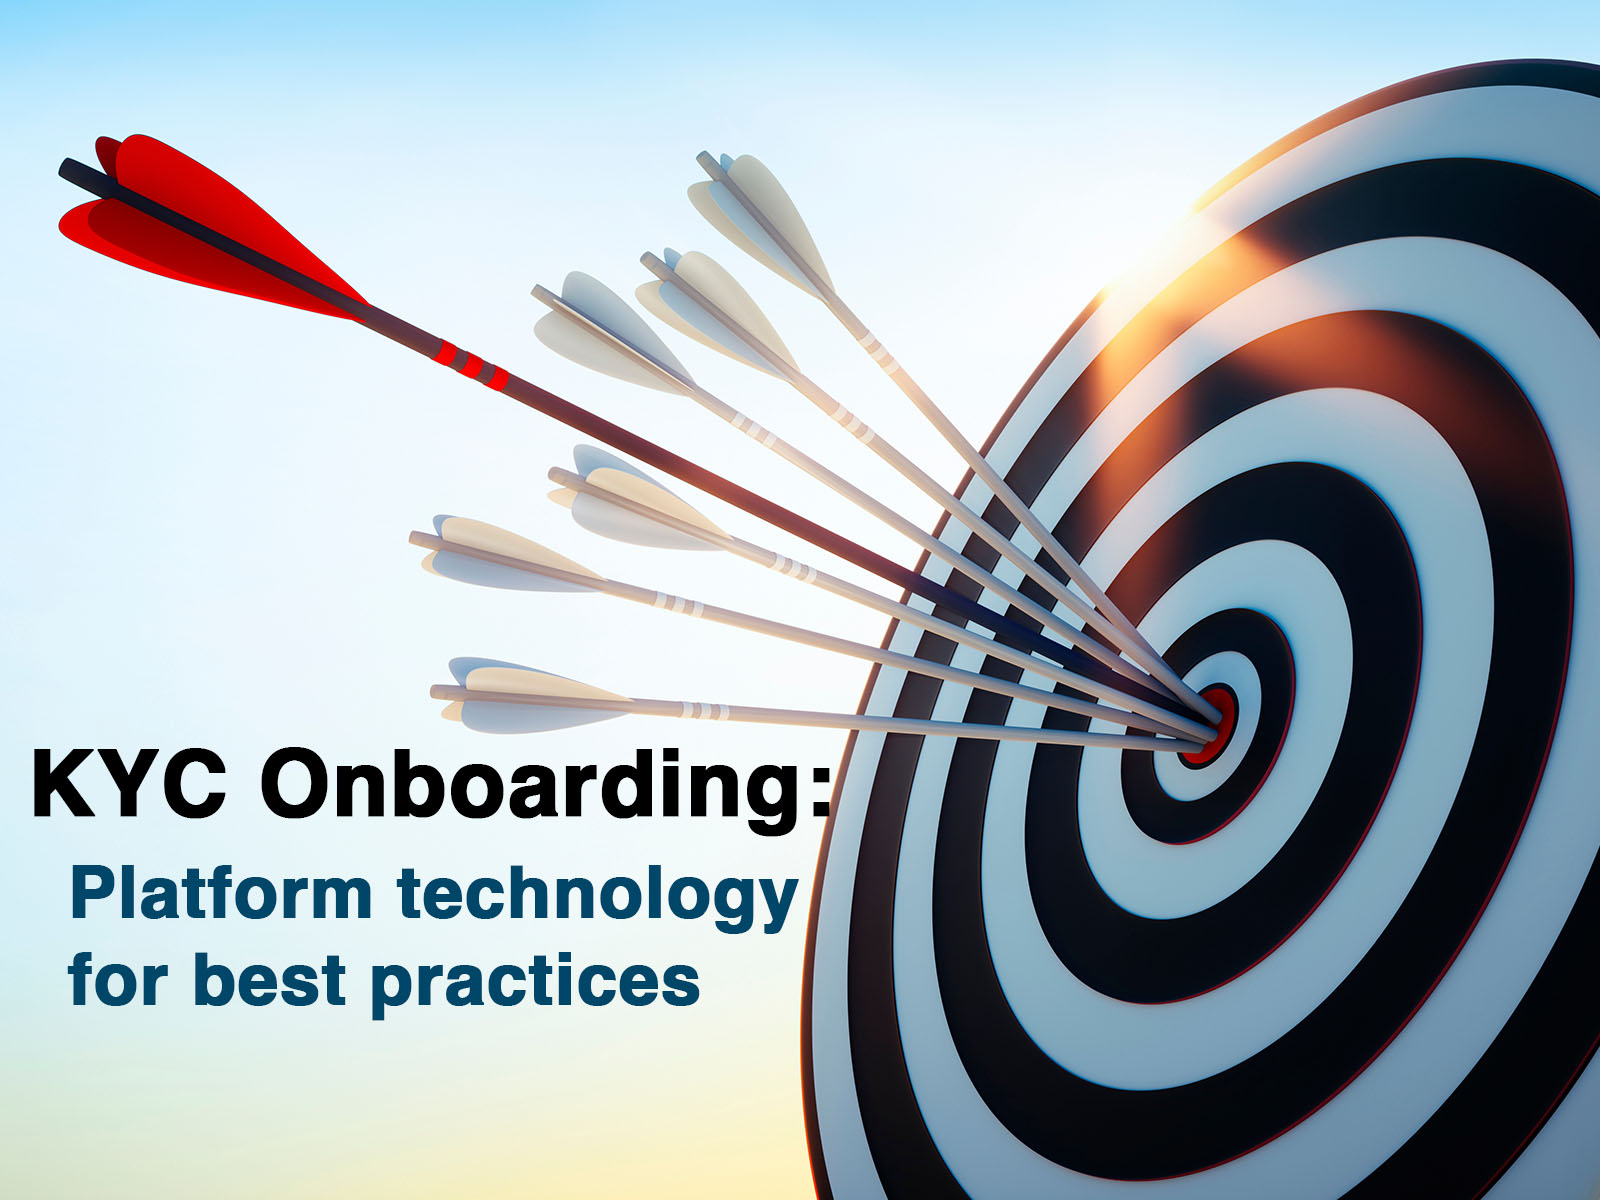 Image shows a a black and white archery target with arrows filling the bullseye. Text overlay "KYC Onboarding: Platform technology for best practices." RegTech AML Platform makes possible best practices in KYC Onboarding, KYC/AML, AML Compliance and more. 